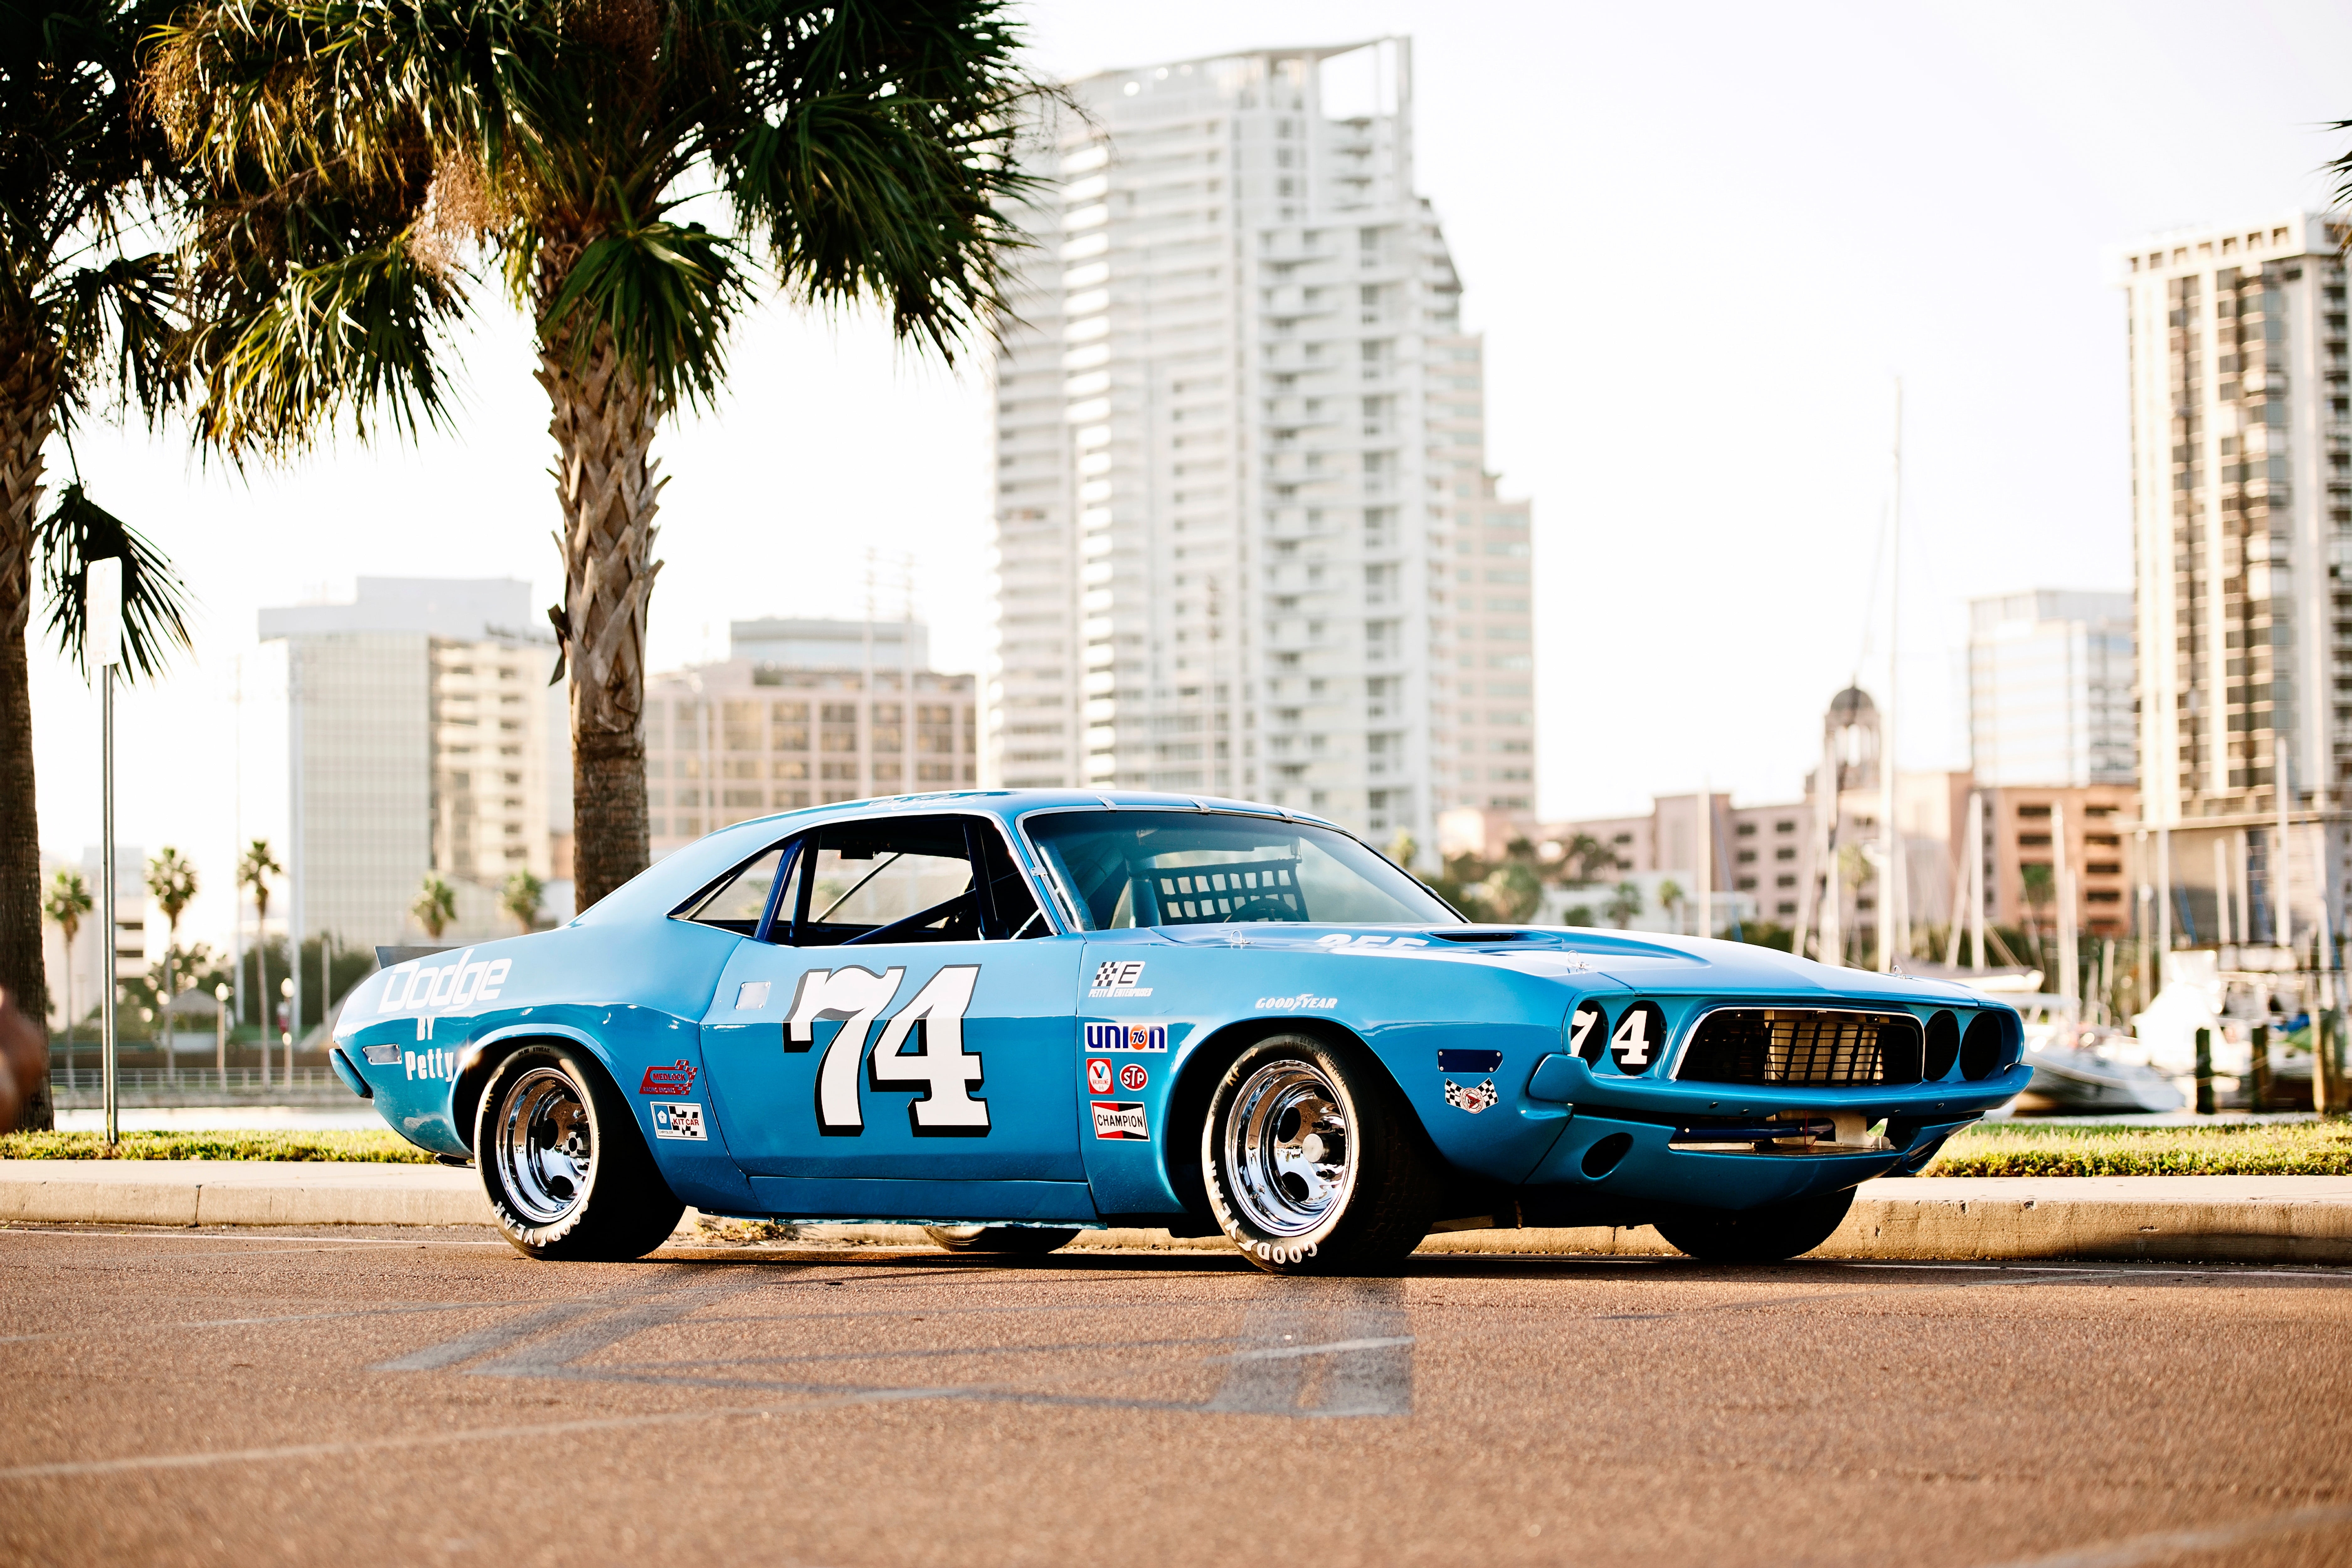 Blue Muscle Car 1973 Dodge Challenger Nascar Muscle Cars American Cars Hd Wallpaper Wallpaper Flare